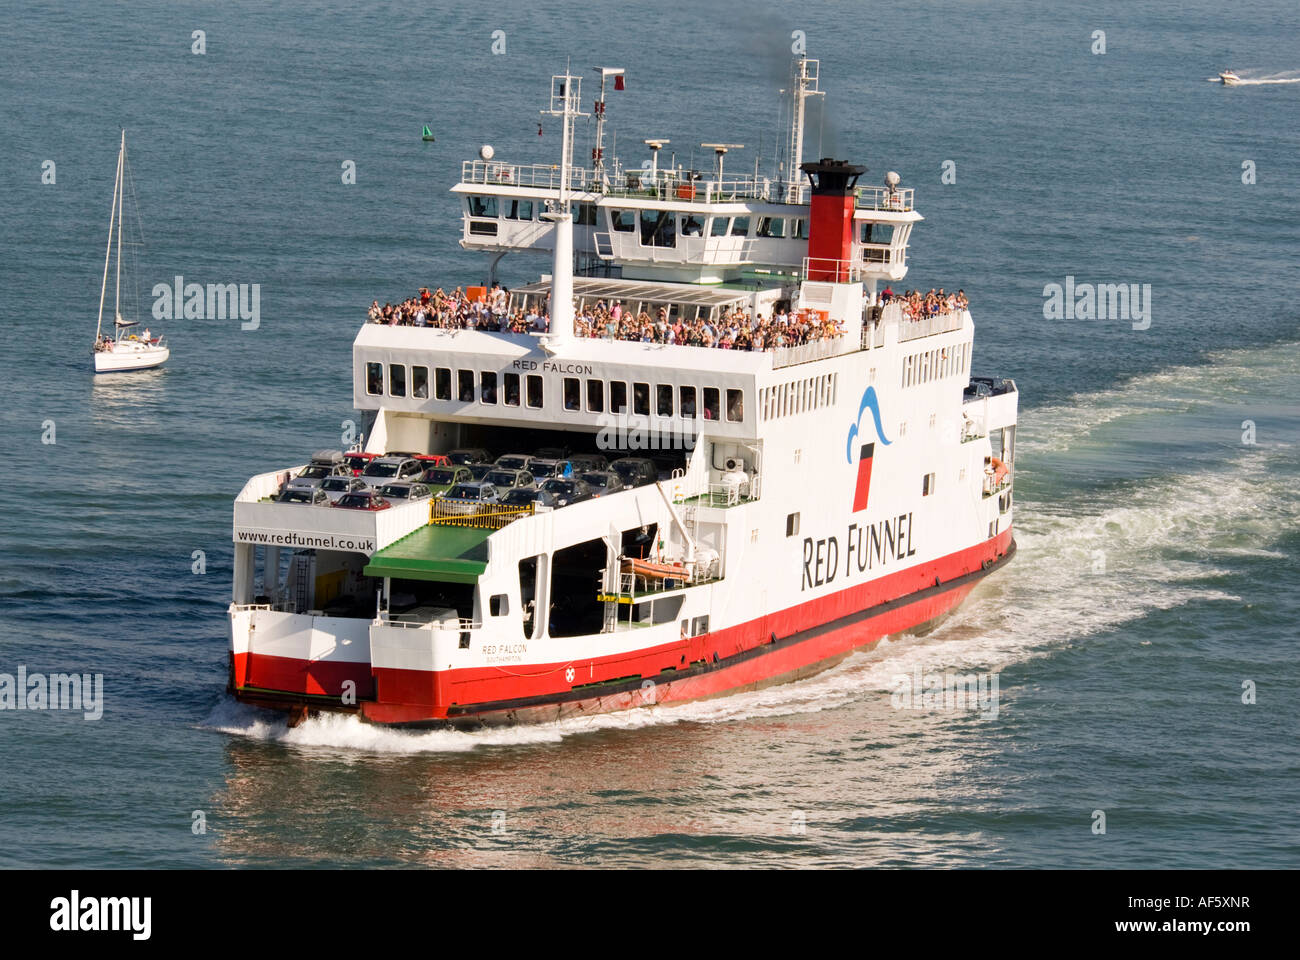 The Isle of Wight ferry the Red Falcon Stock Photo